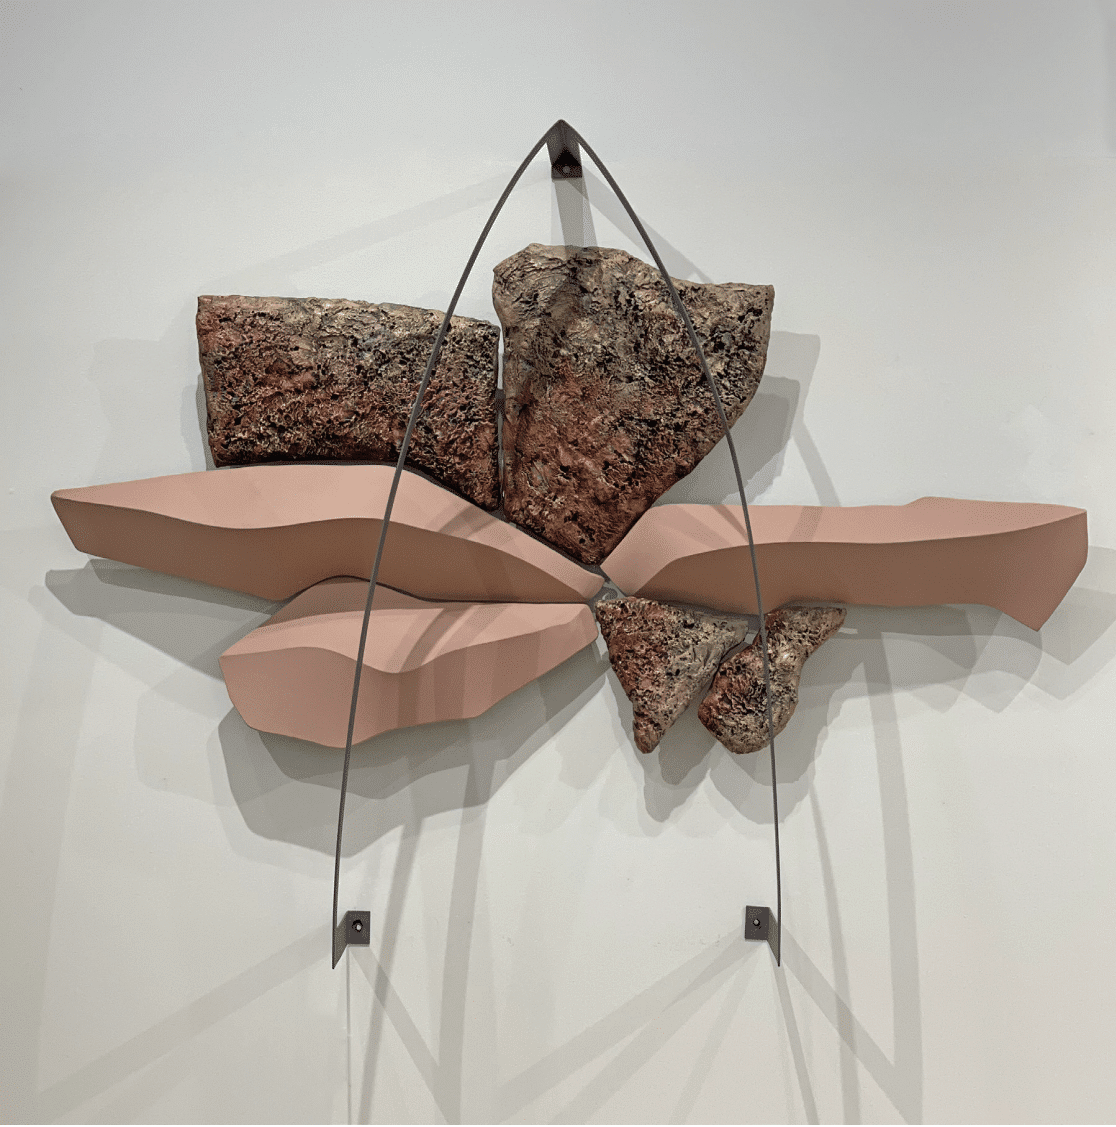 <b>Pat Musick</b><br><i>Epilogue 6</i>, 1990<br>Hydrocal, Wood, Steel, Canvas</br> 72 x 85 x 18 inches